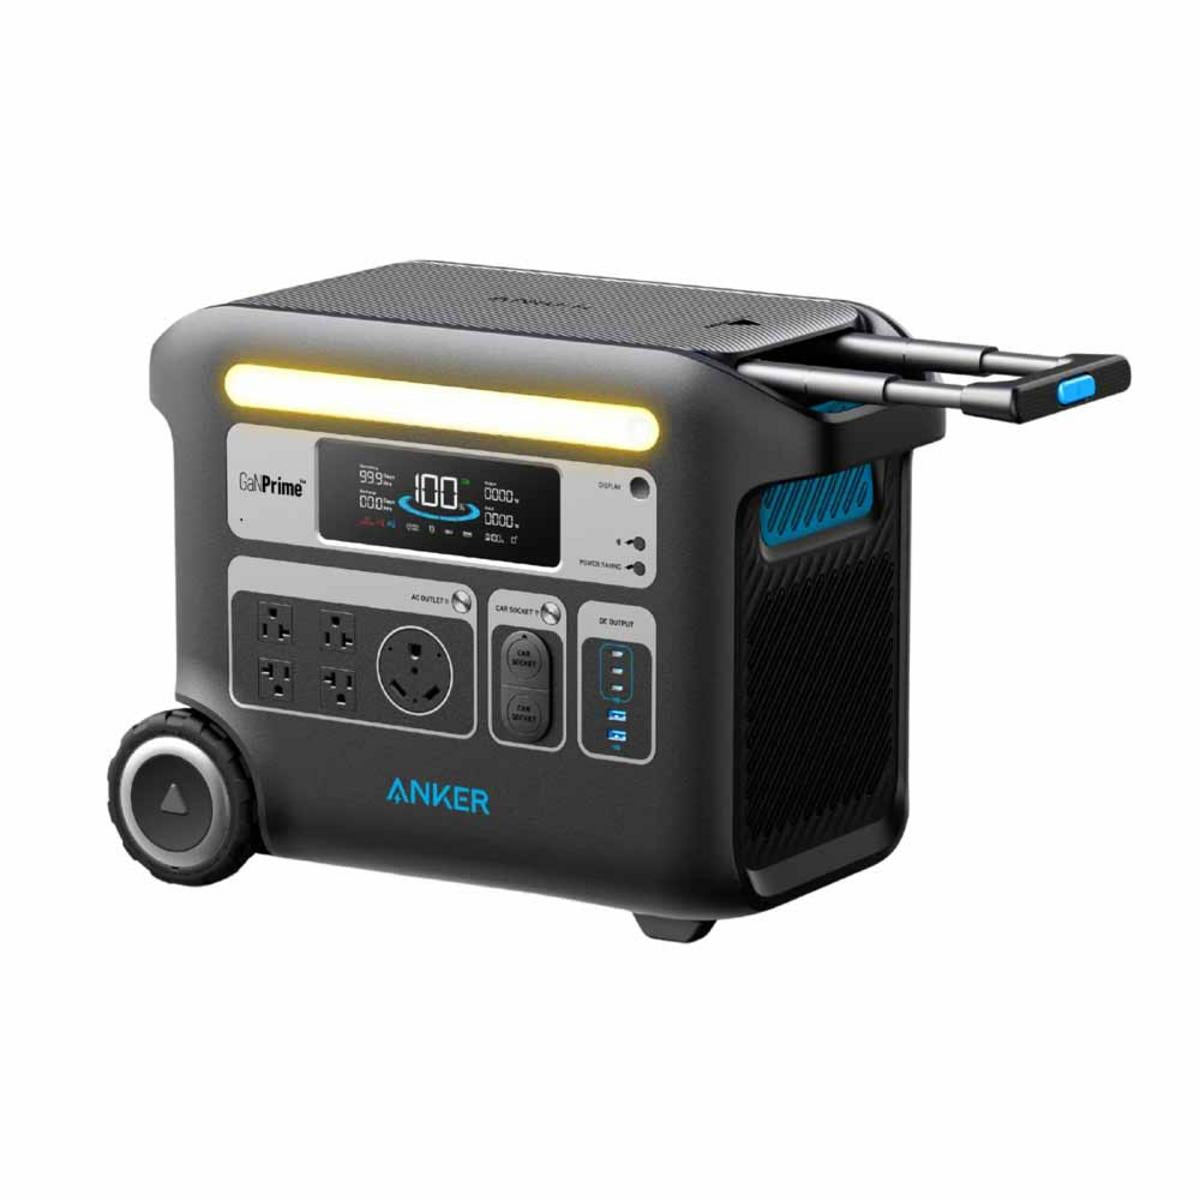 Anker Solar Generator 767 - PowerHouse 2048Wh with 200W Solar Panel and Expansion Battery